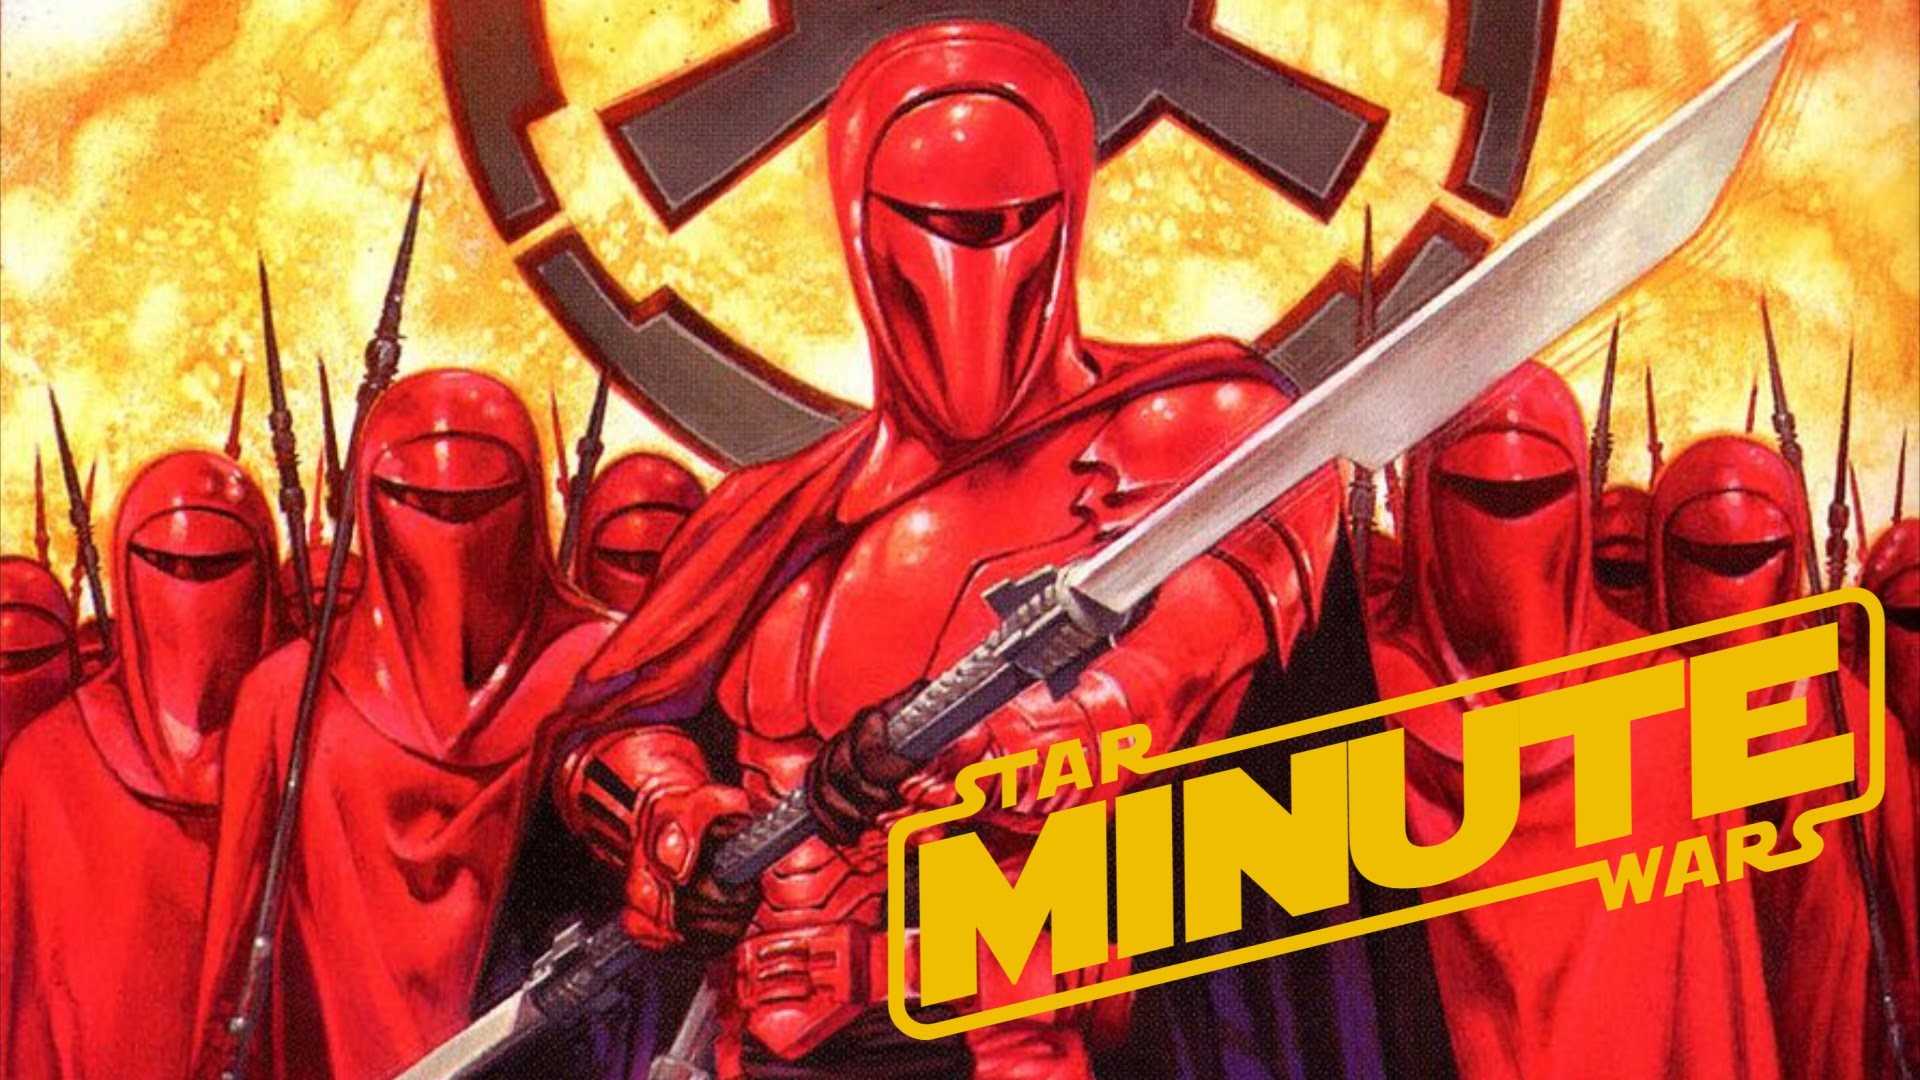 1920x1080 Star Wars Imperial Guard Pictures to Pin on Pinterest - PinsDaddy